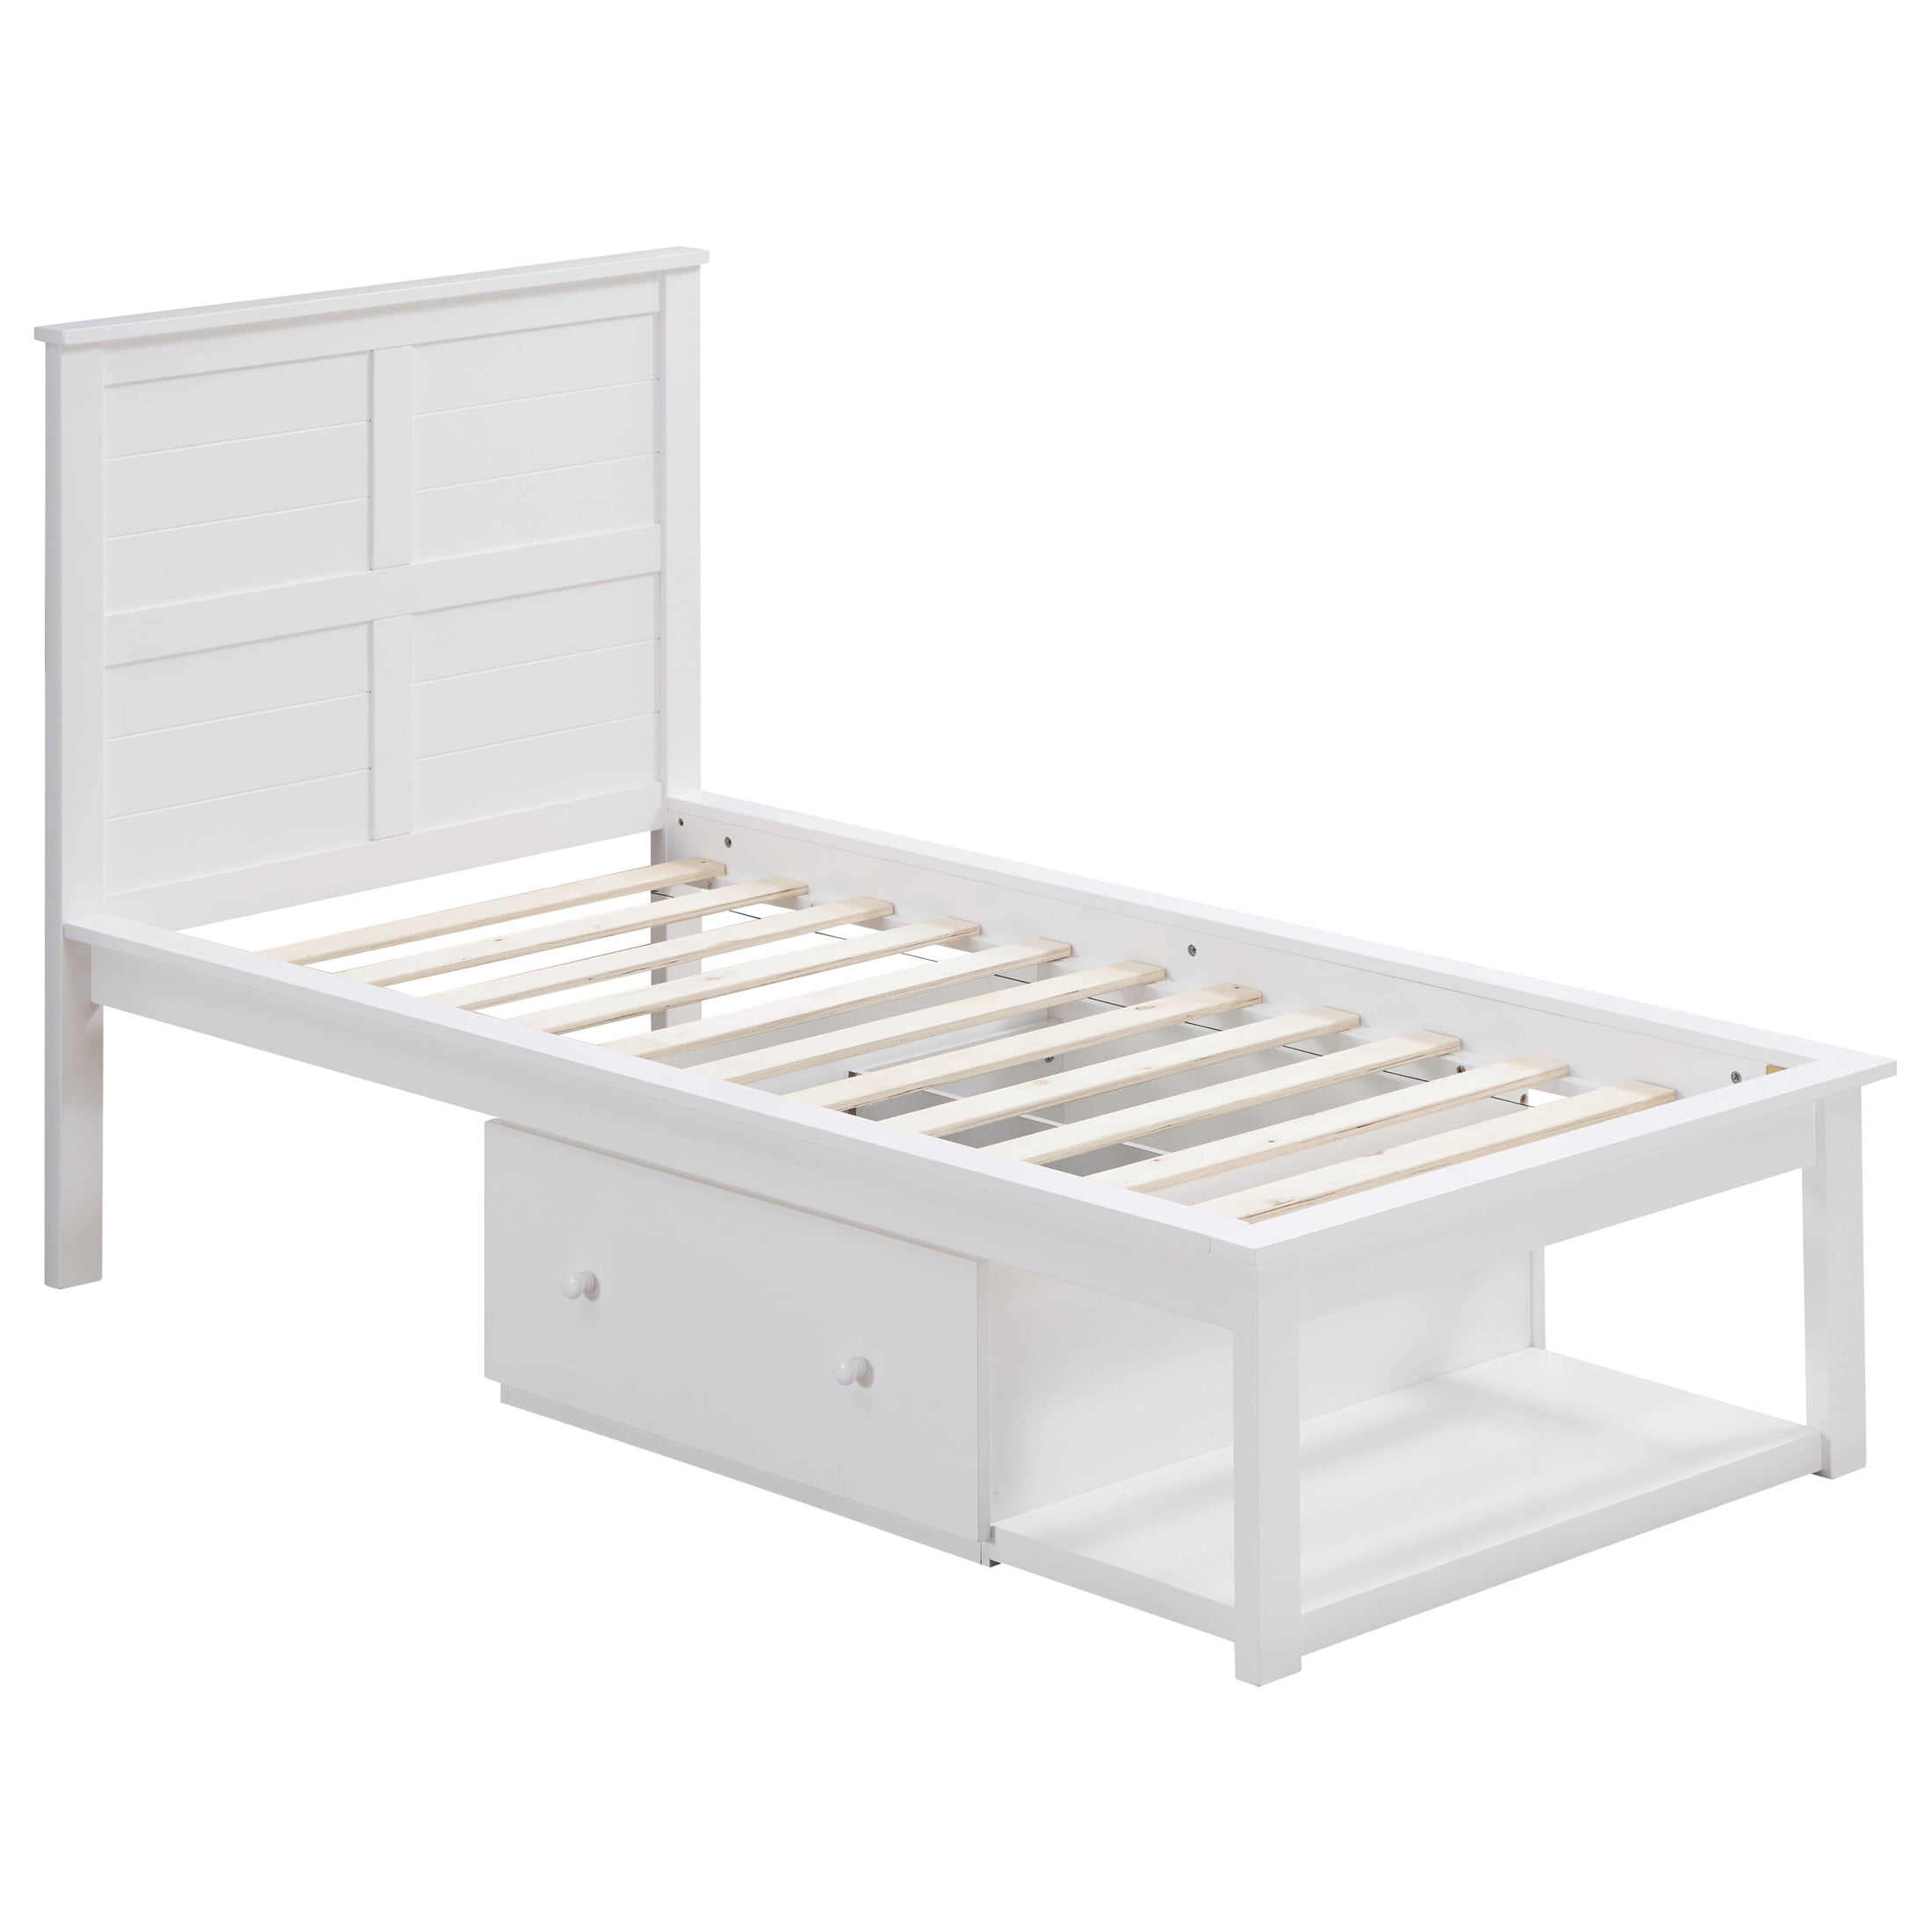 Picture of Acme Furniture BD00649T 79 x 44 x 47 in. Iolanda Bed, White - Twin Size